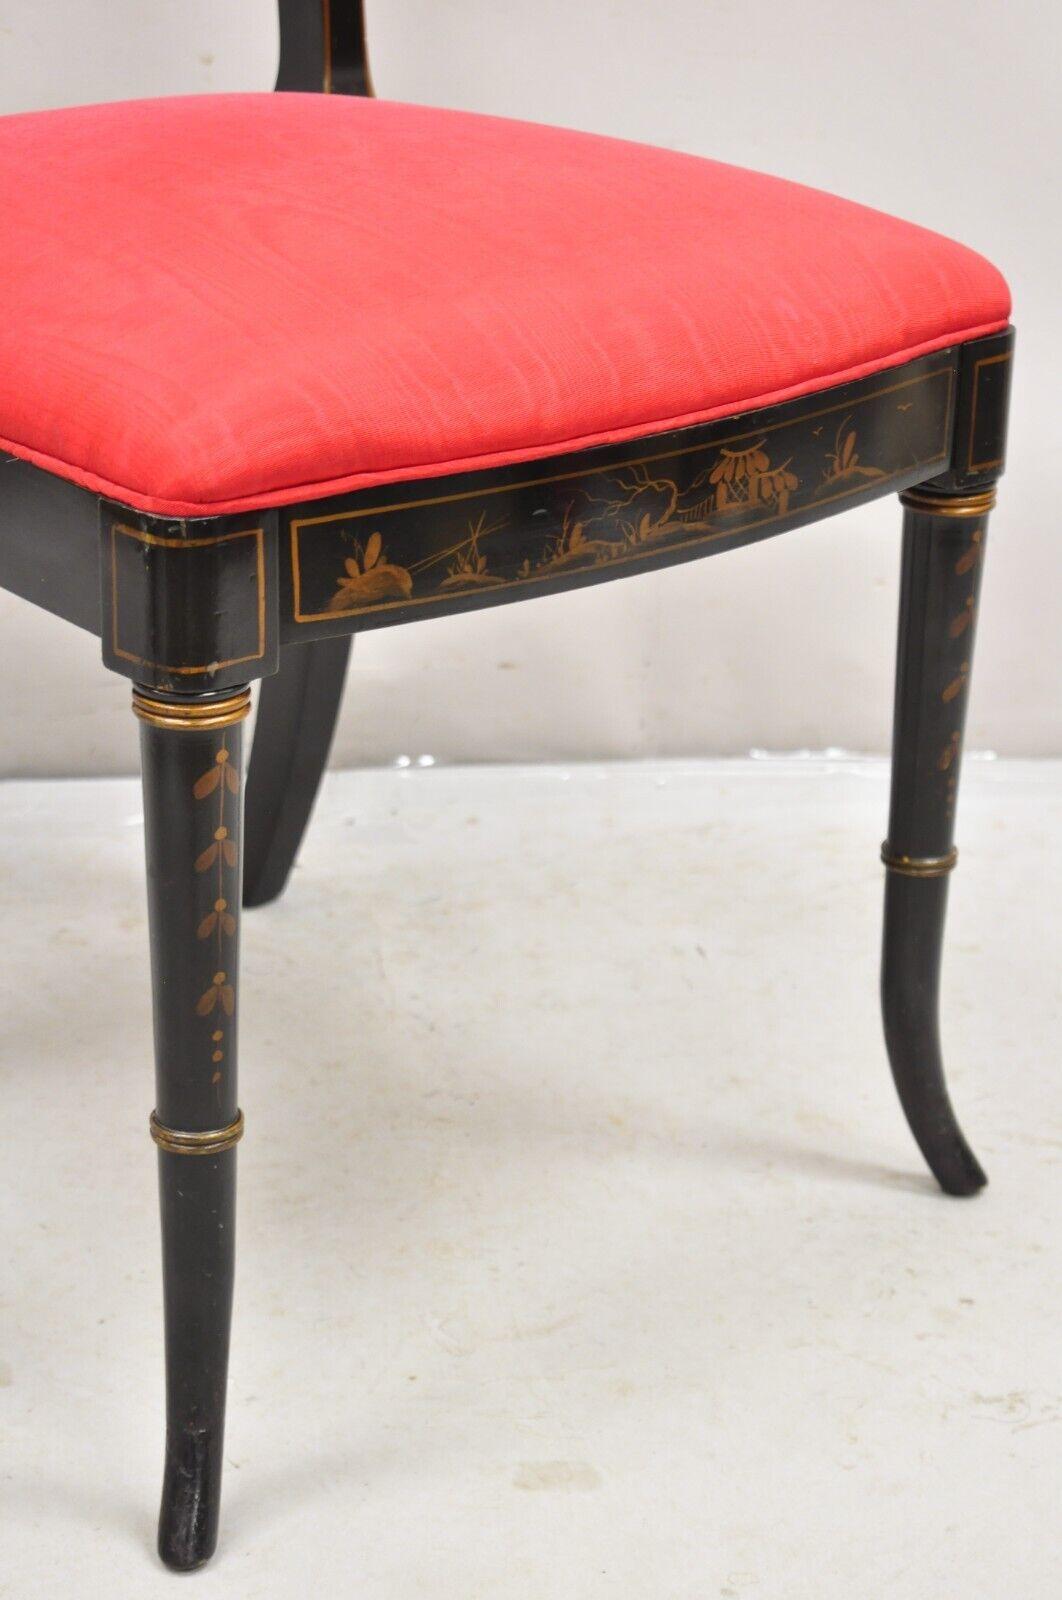 Vintage Chinoiserie English Regency Style Black Painted Dining Chairs - Set of 6 In Good Condition For Sale In Philadelphia, PA